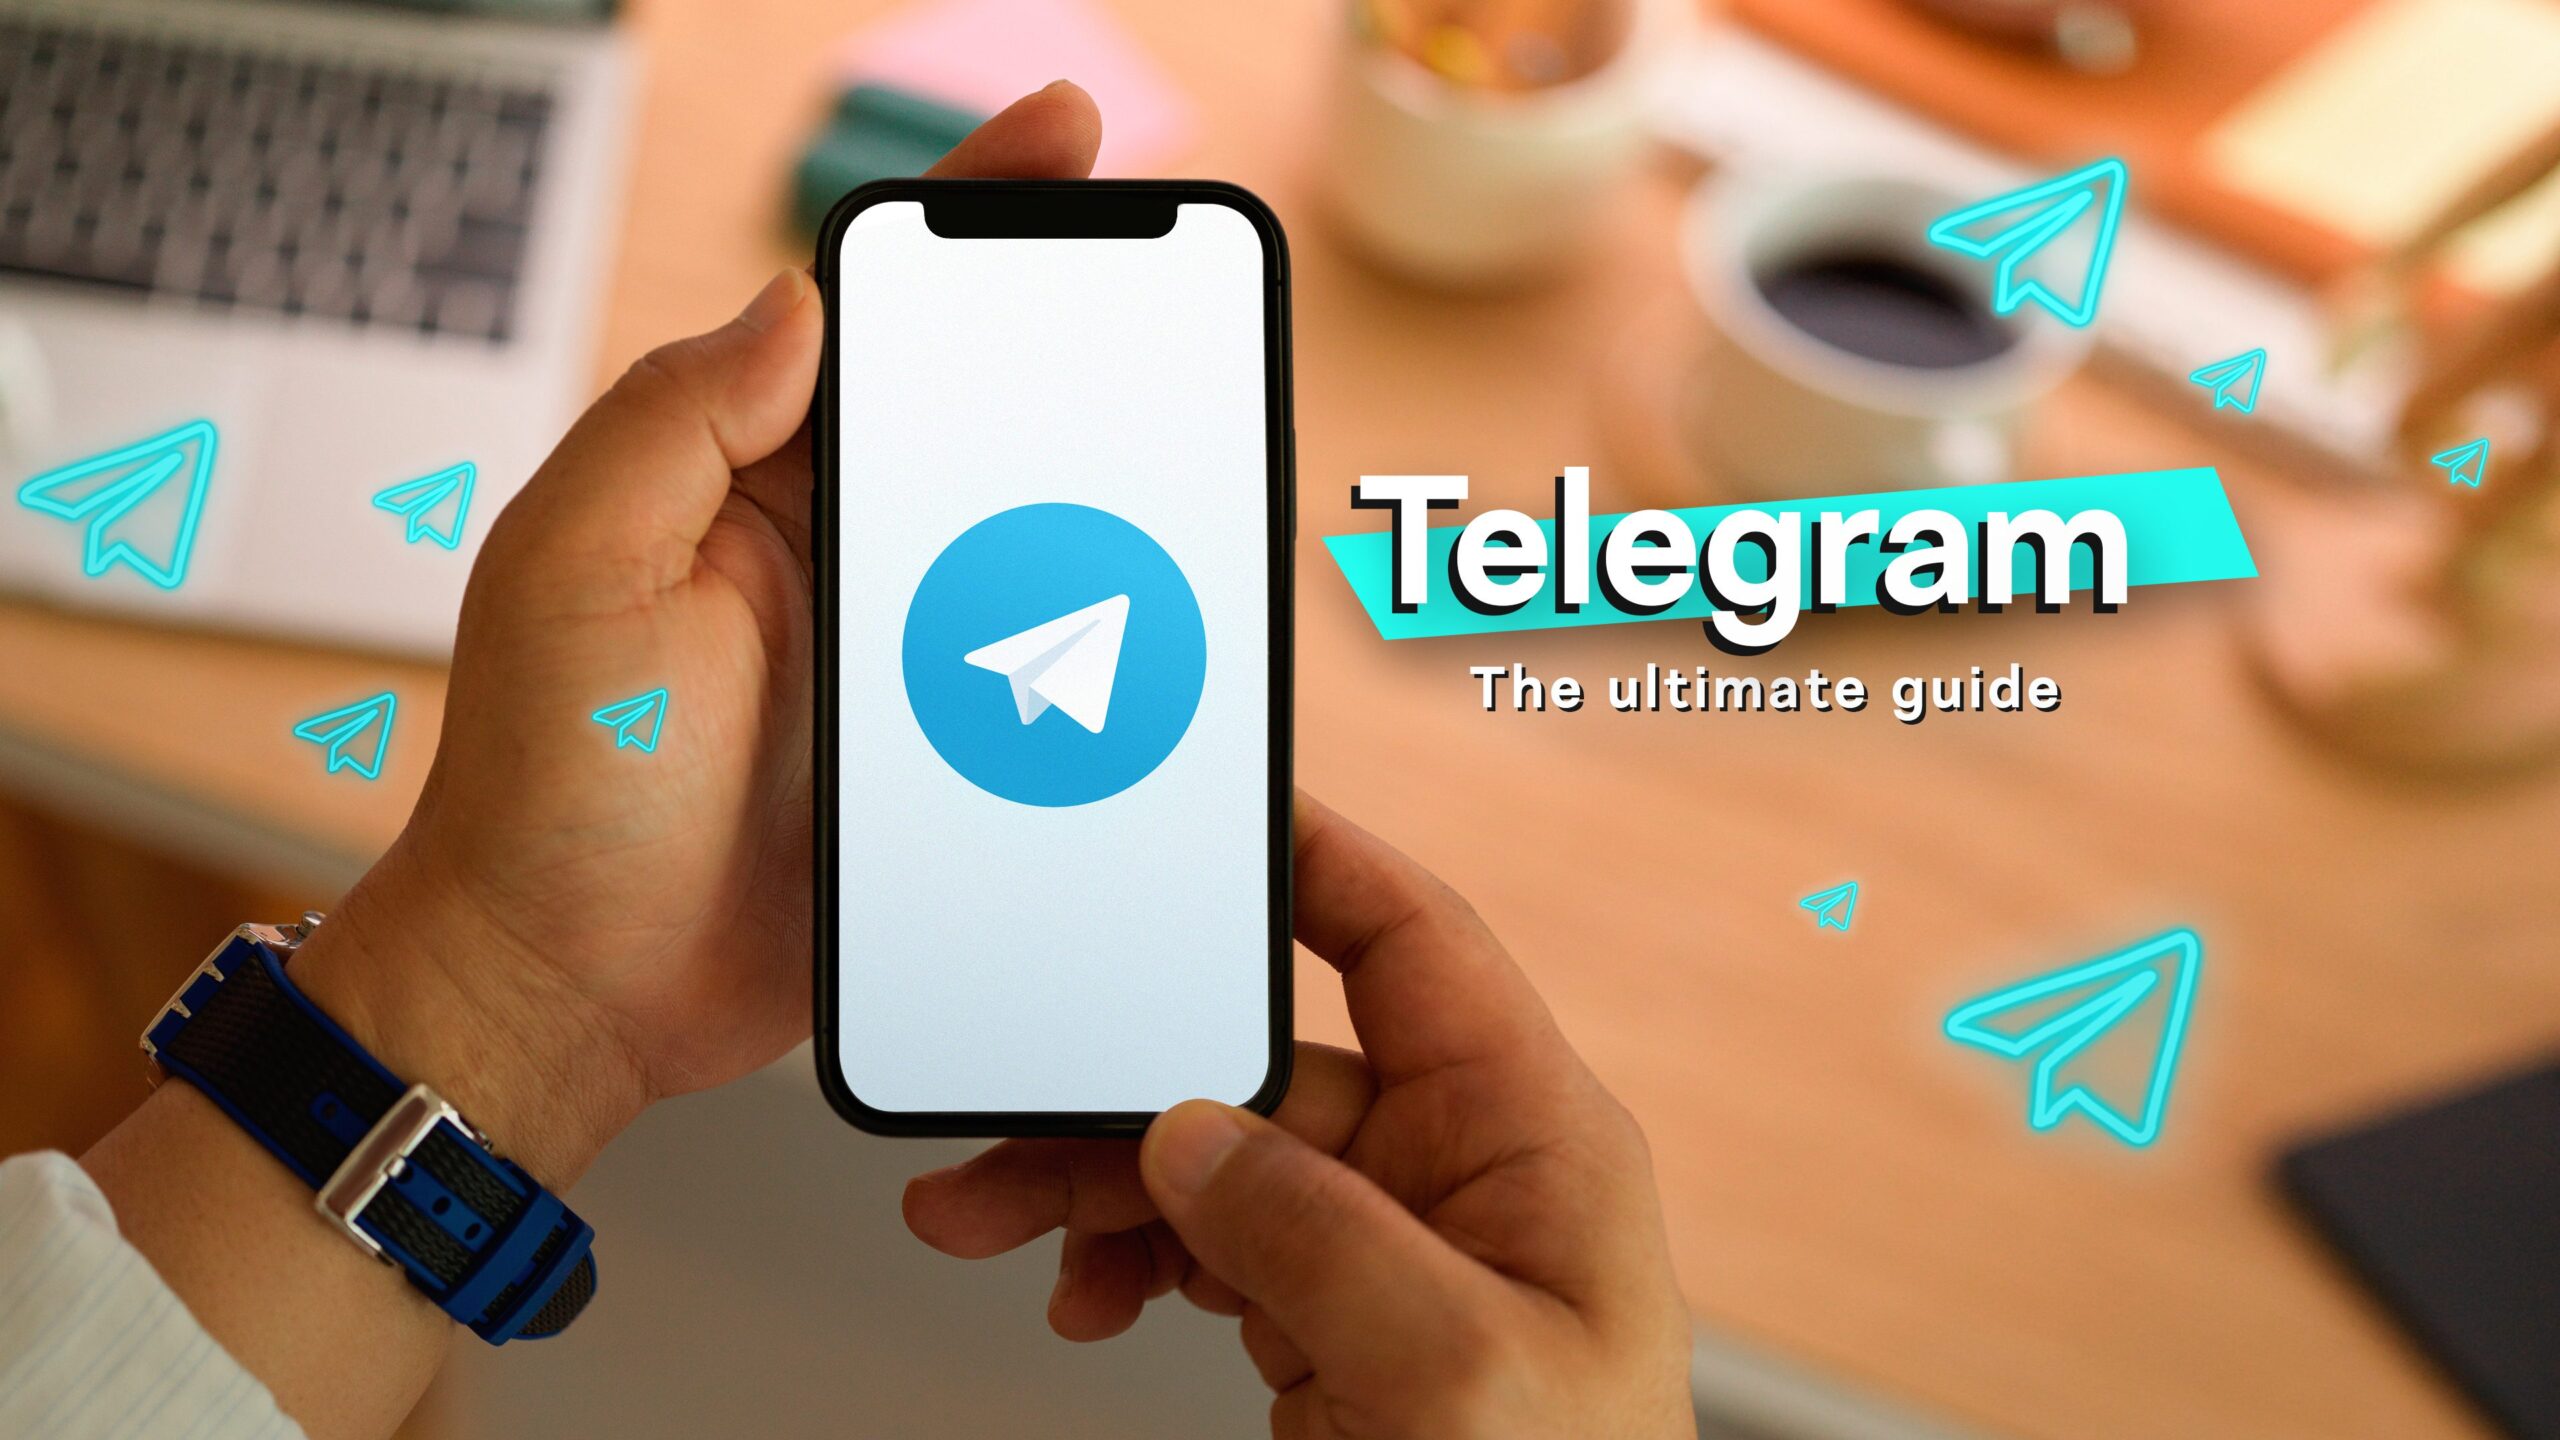 Telegram gains 70M new users after Facebook outage